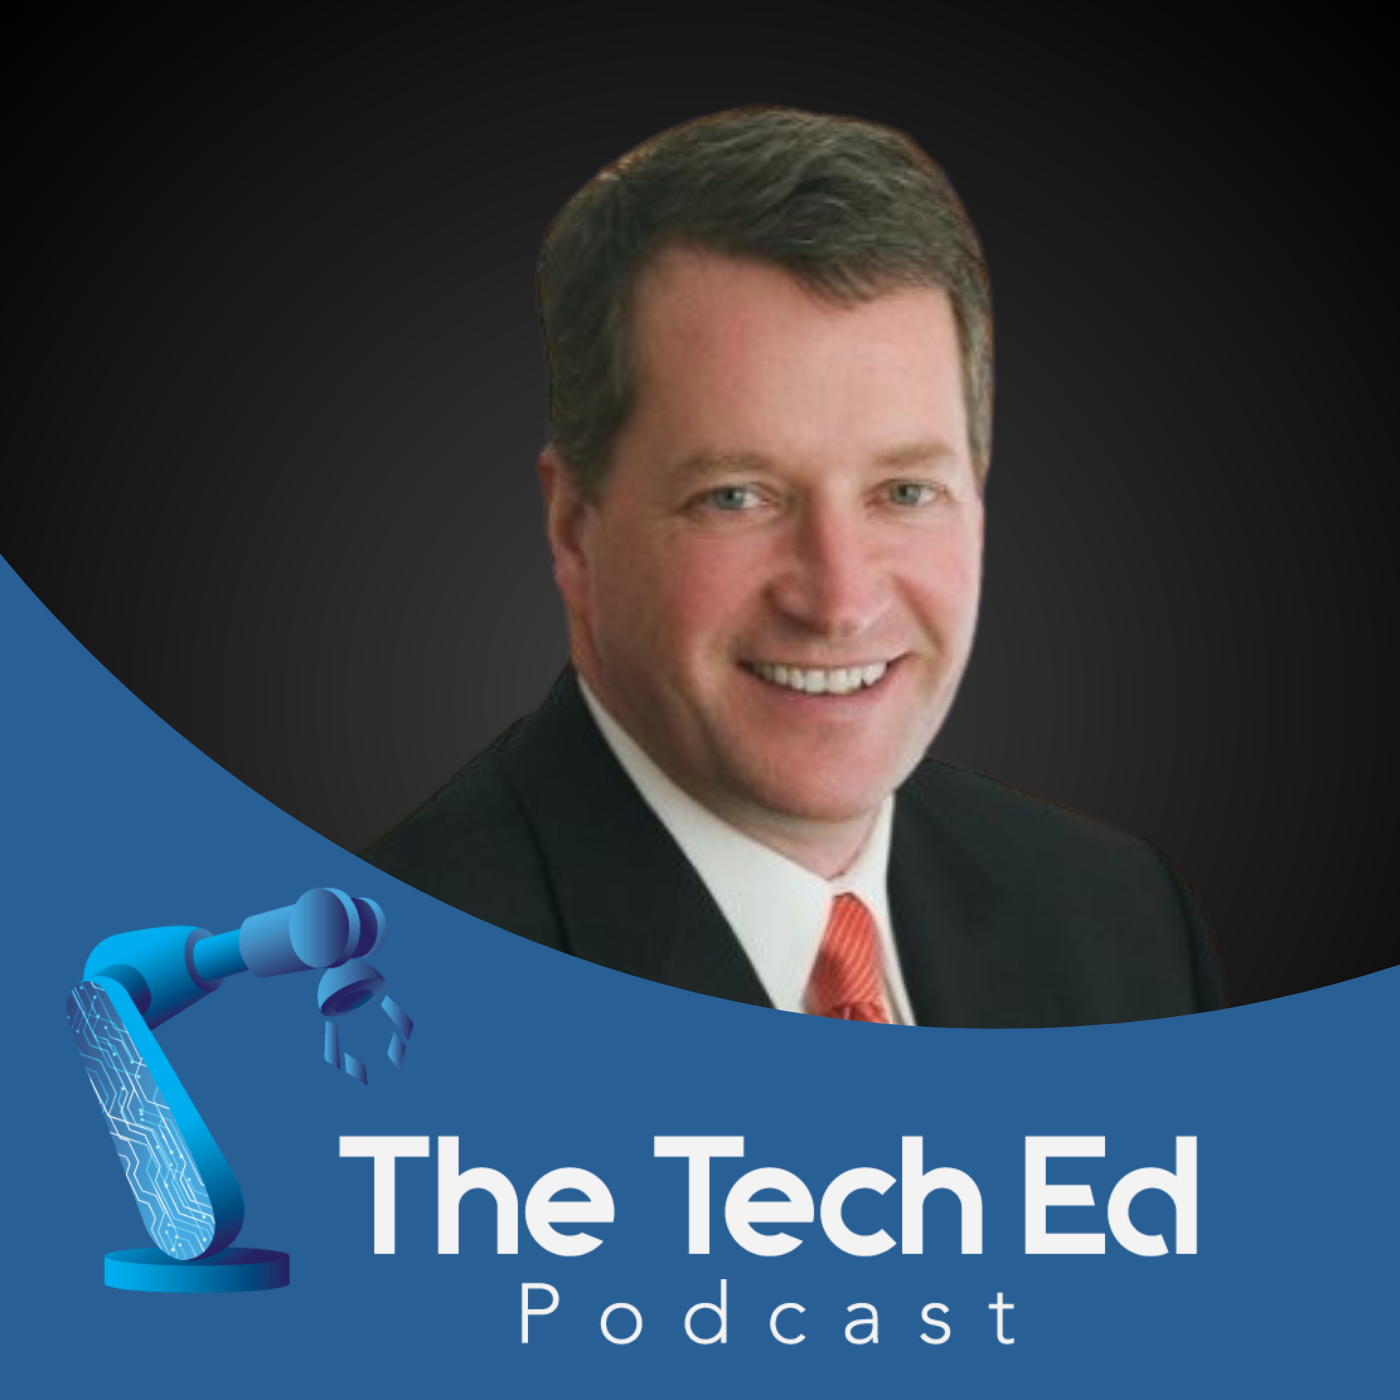 Dan Ariens on The TechEd Podcast